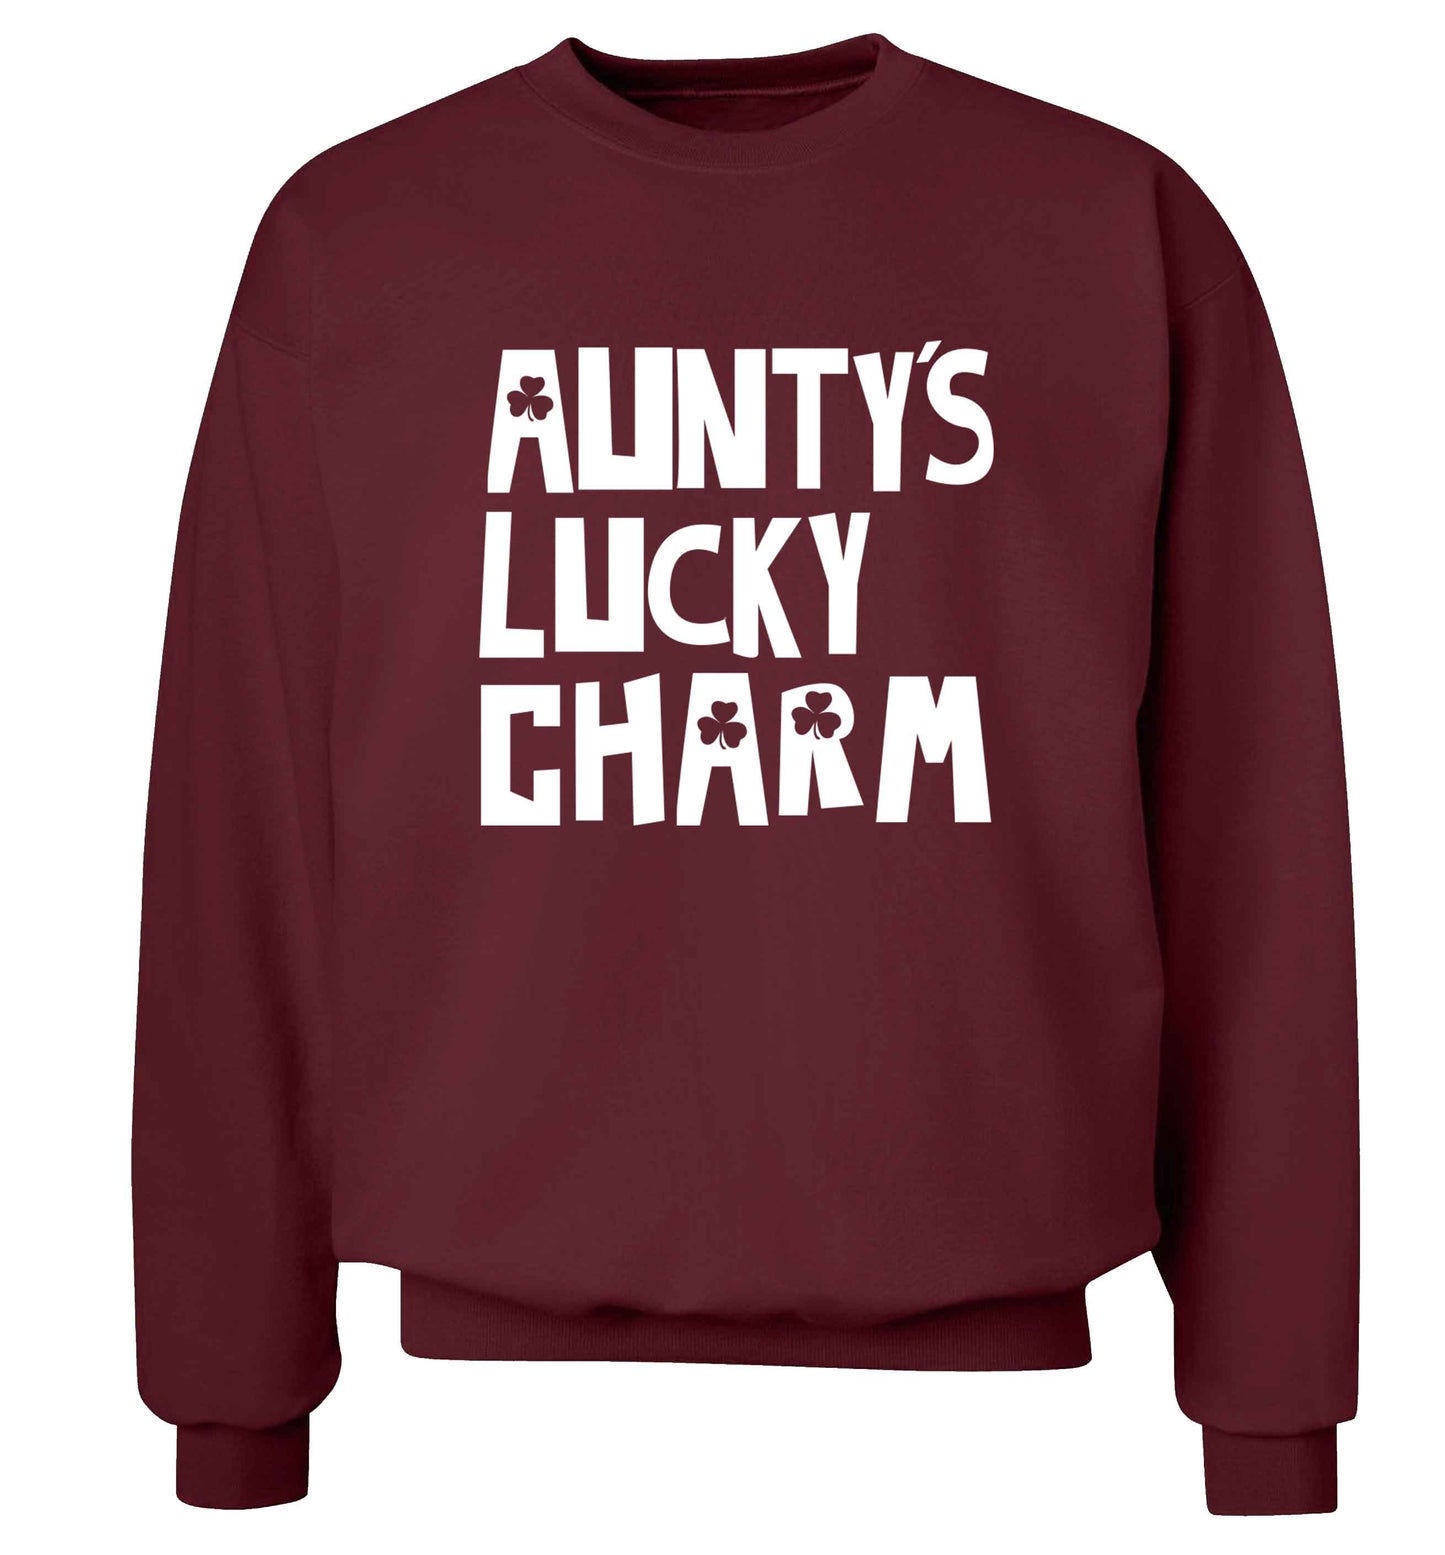 Aunty's lucky charm adult's unisex maroon sweater 2XL